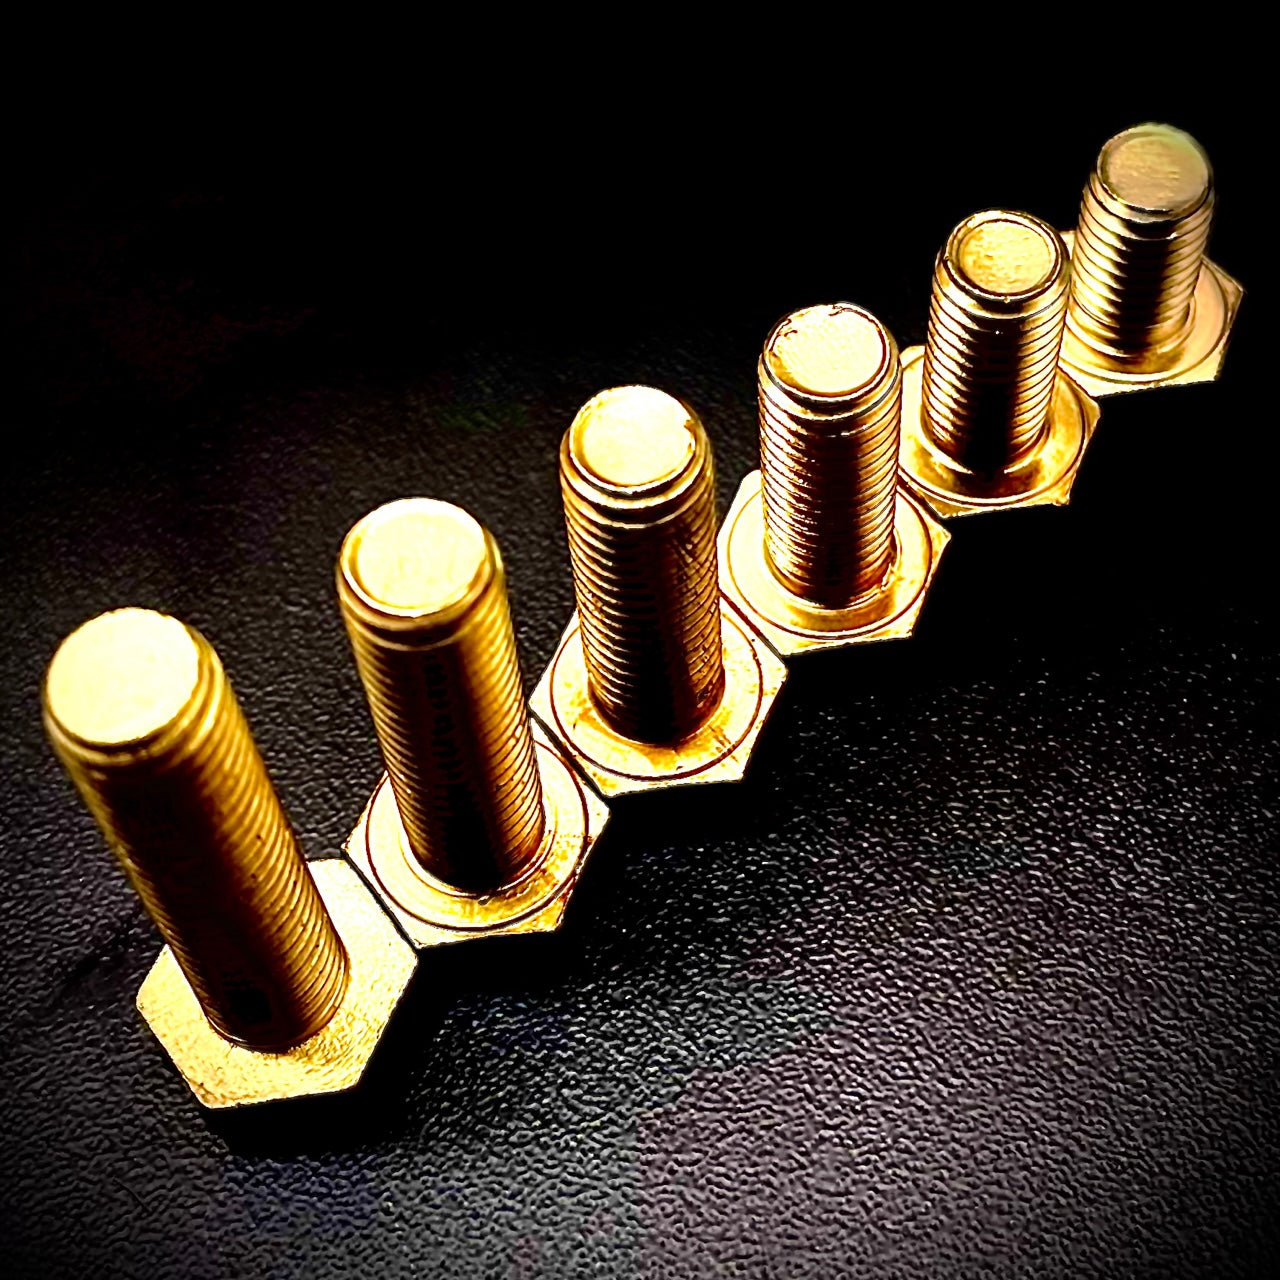 M6 Brass Hex Set Screw Fully Threaded Bolt DIN933 - Fixaball Ltd. Fixings and Fasteners UK